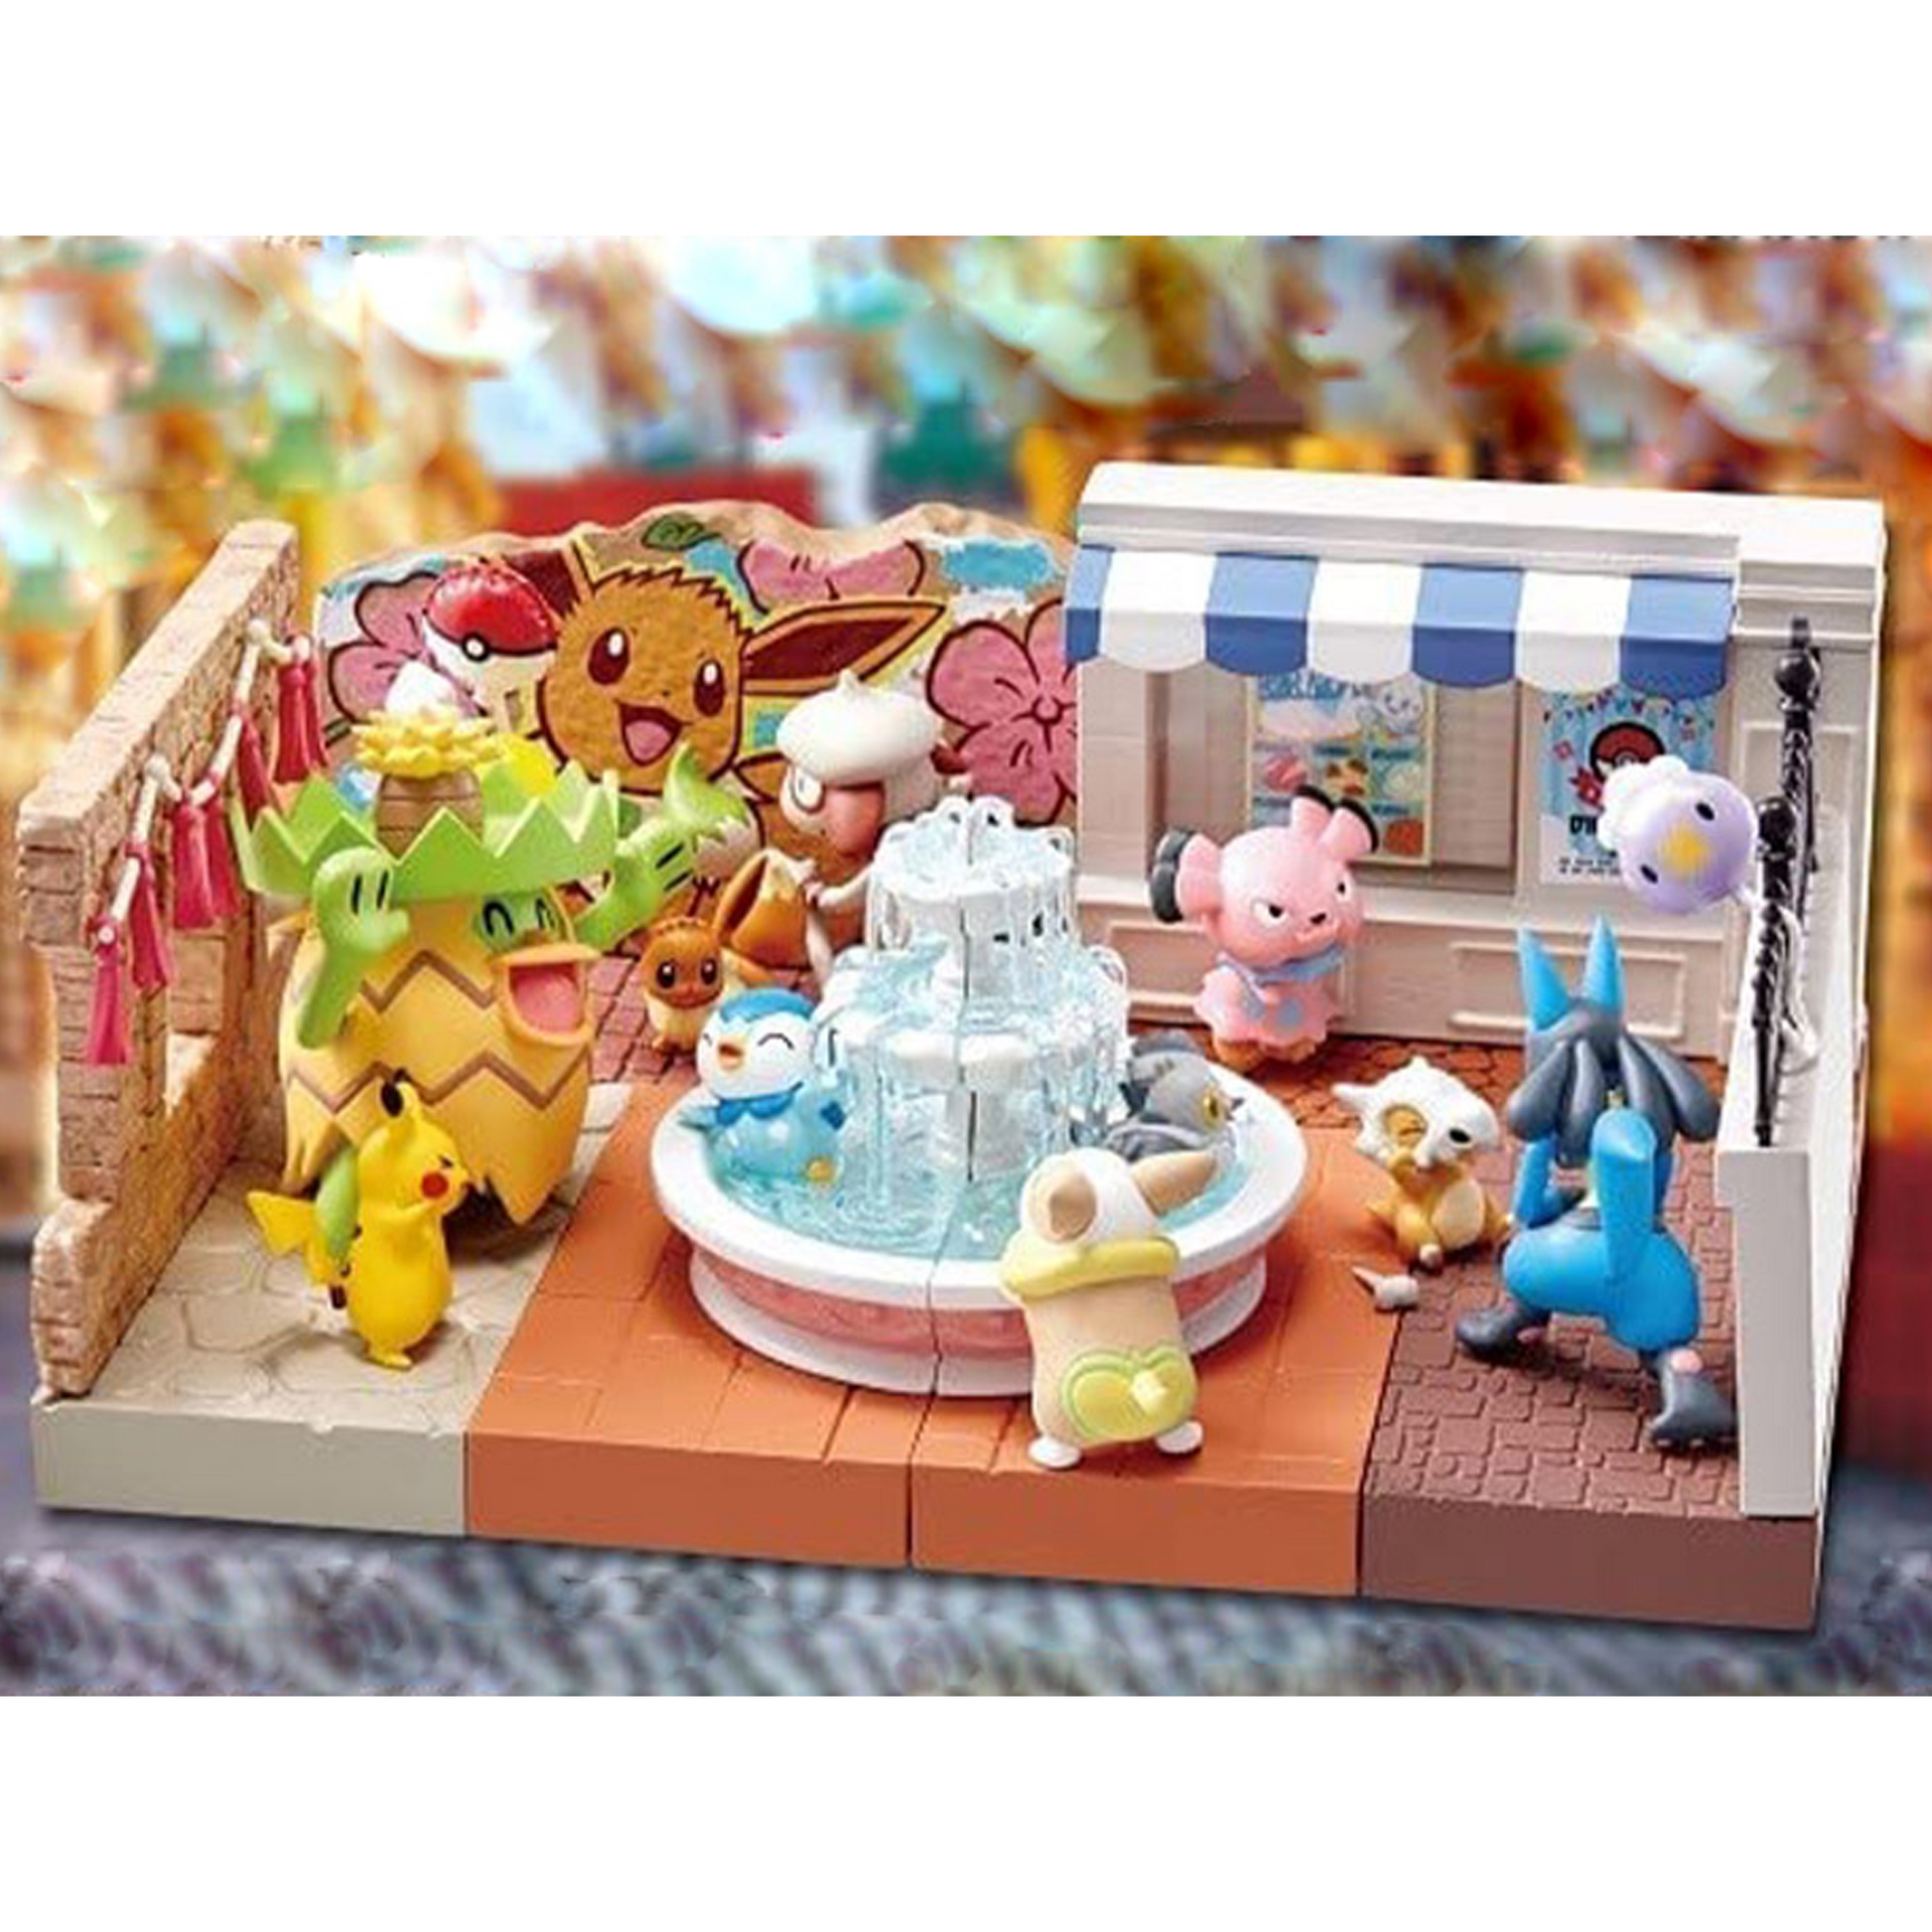 Re-Ment Pokémon Town Vol. 2 Festival Street Blind Box (All 6 Figures Together) | Happy Piranha